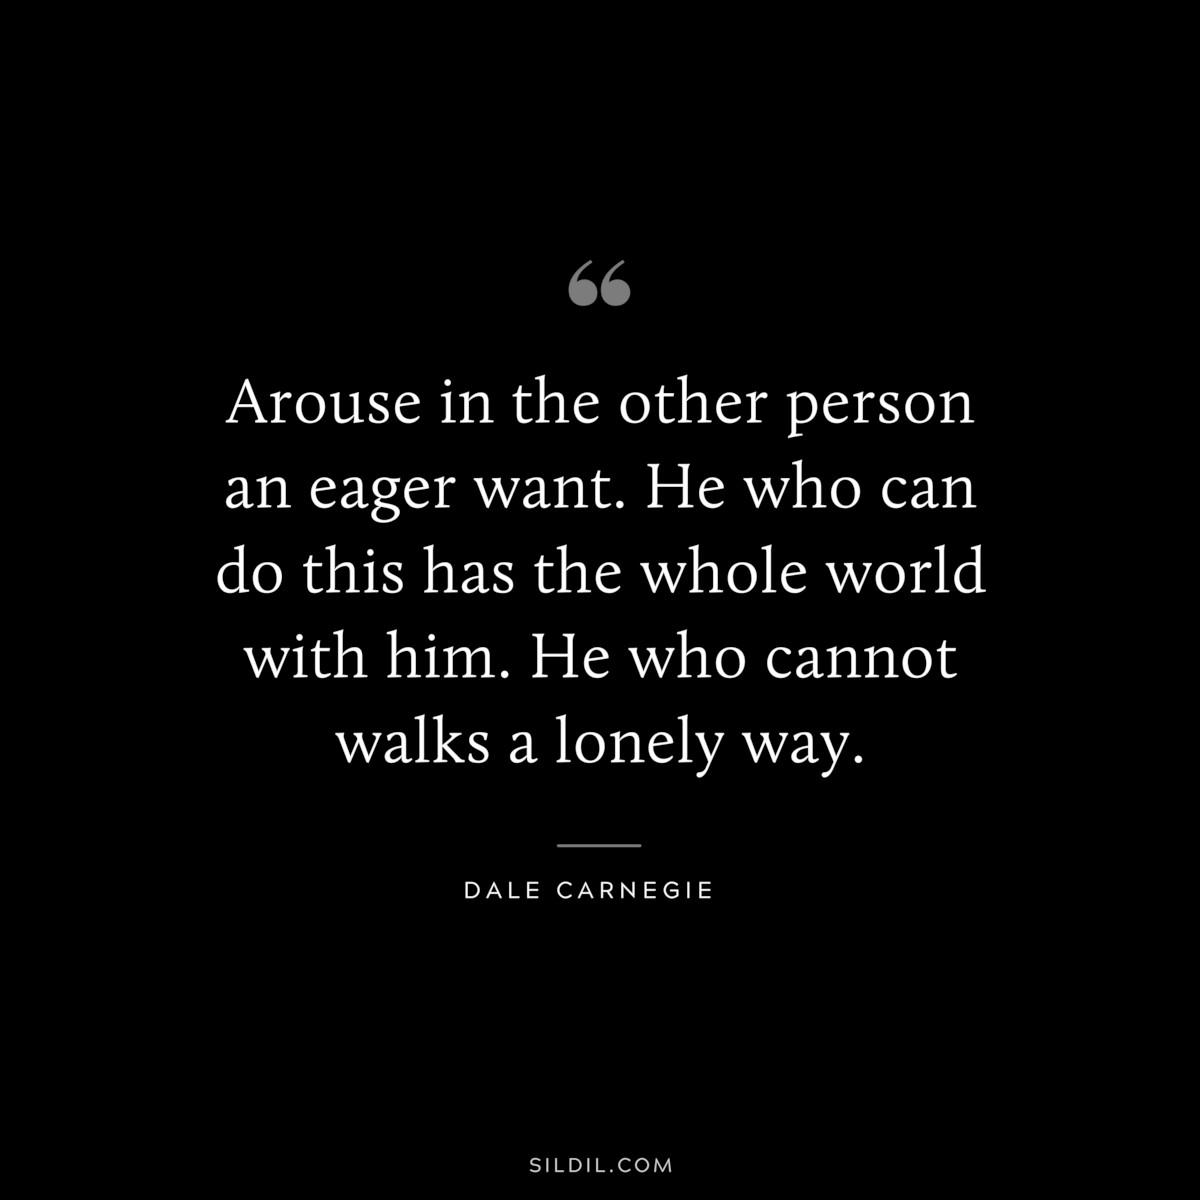 Arouse in the other person an eager want. He who can do this has the whole world with him. He who cannot walks a lonely way.― Dale Carnegie